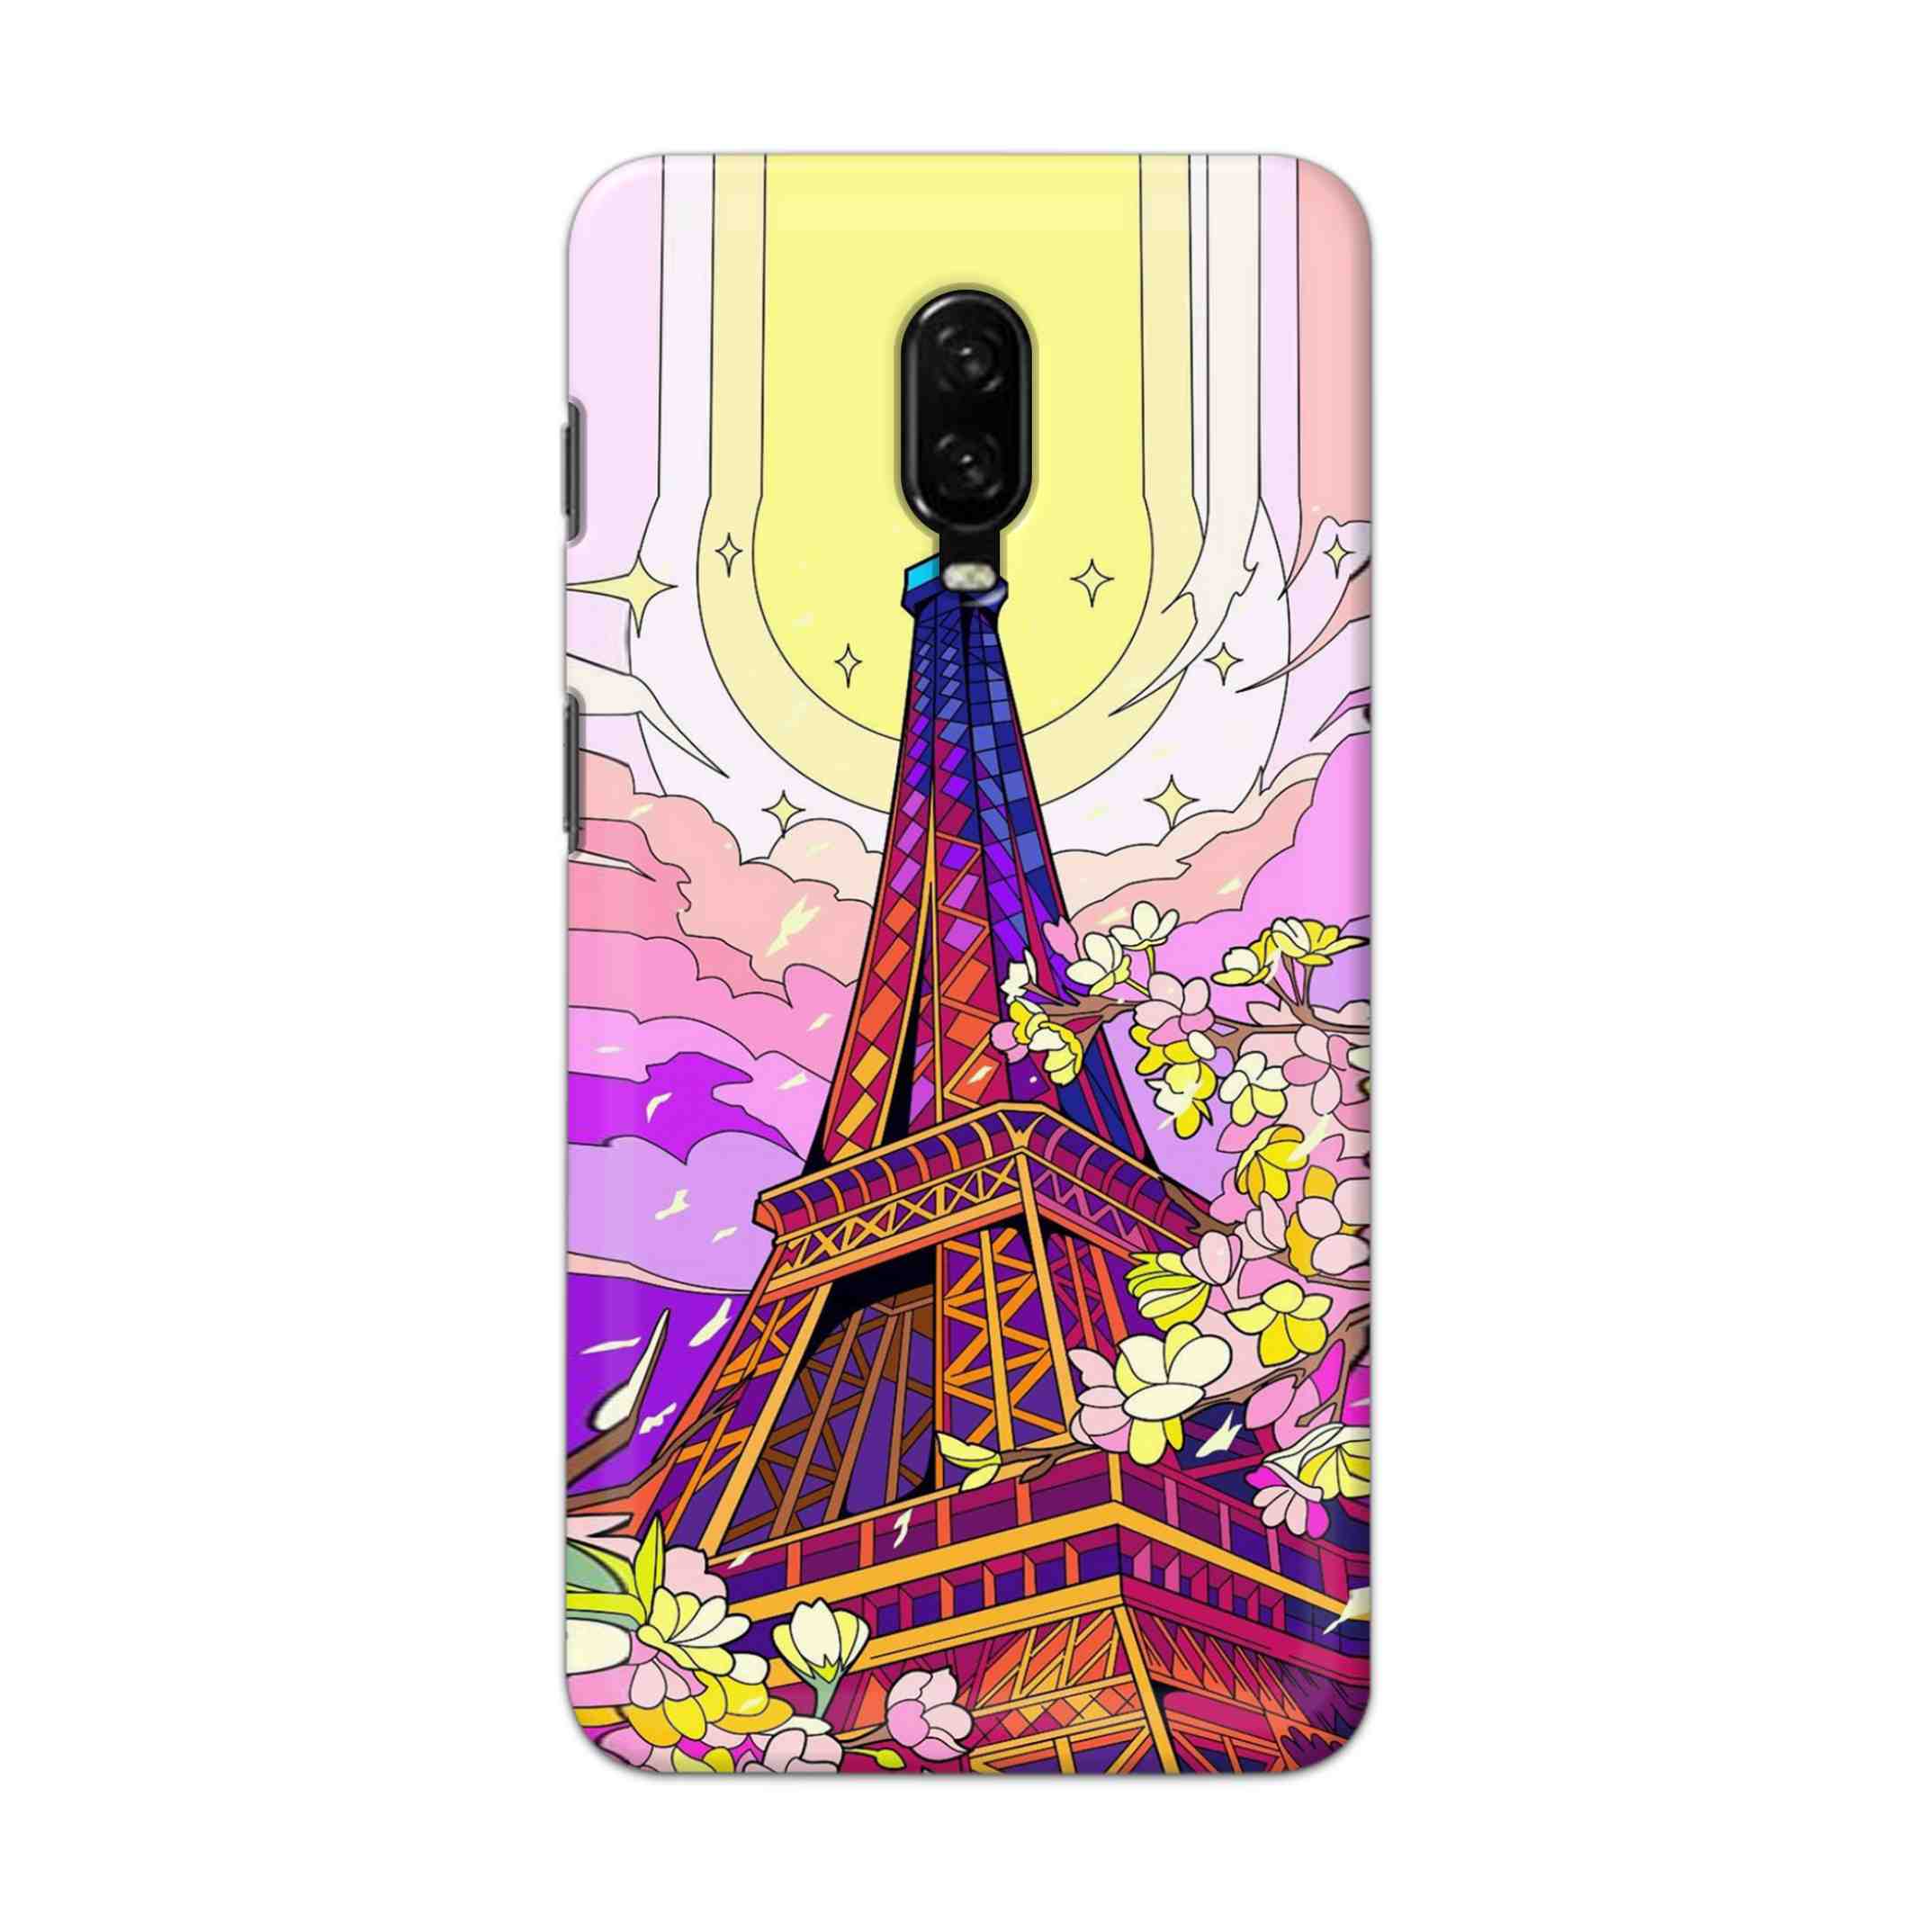 Buy Eiffel Tower Hard Back Mobile Phone Case Cover For OnePlus 6T Online